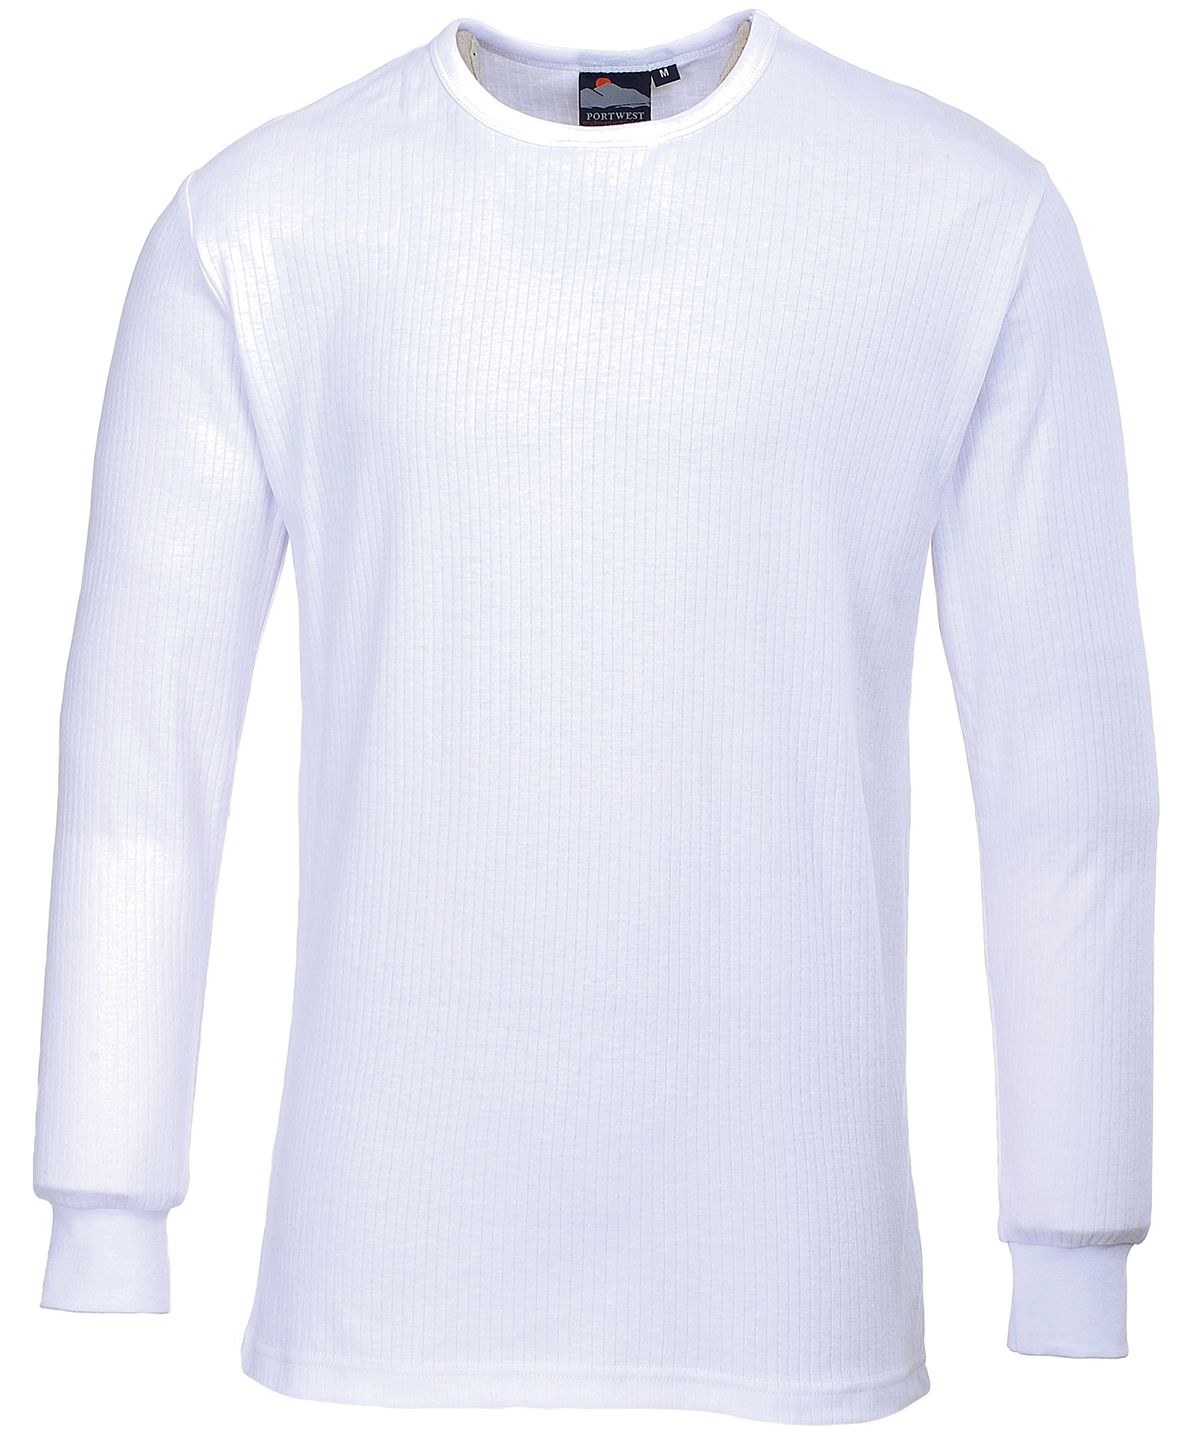 Thermal T-Shirt Long Sleeved (B123) White Size 2XLarge